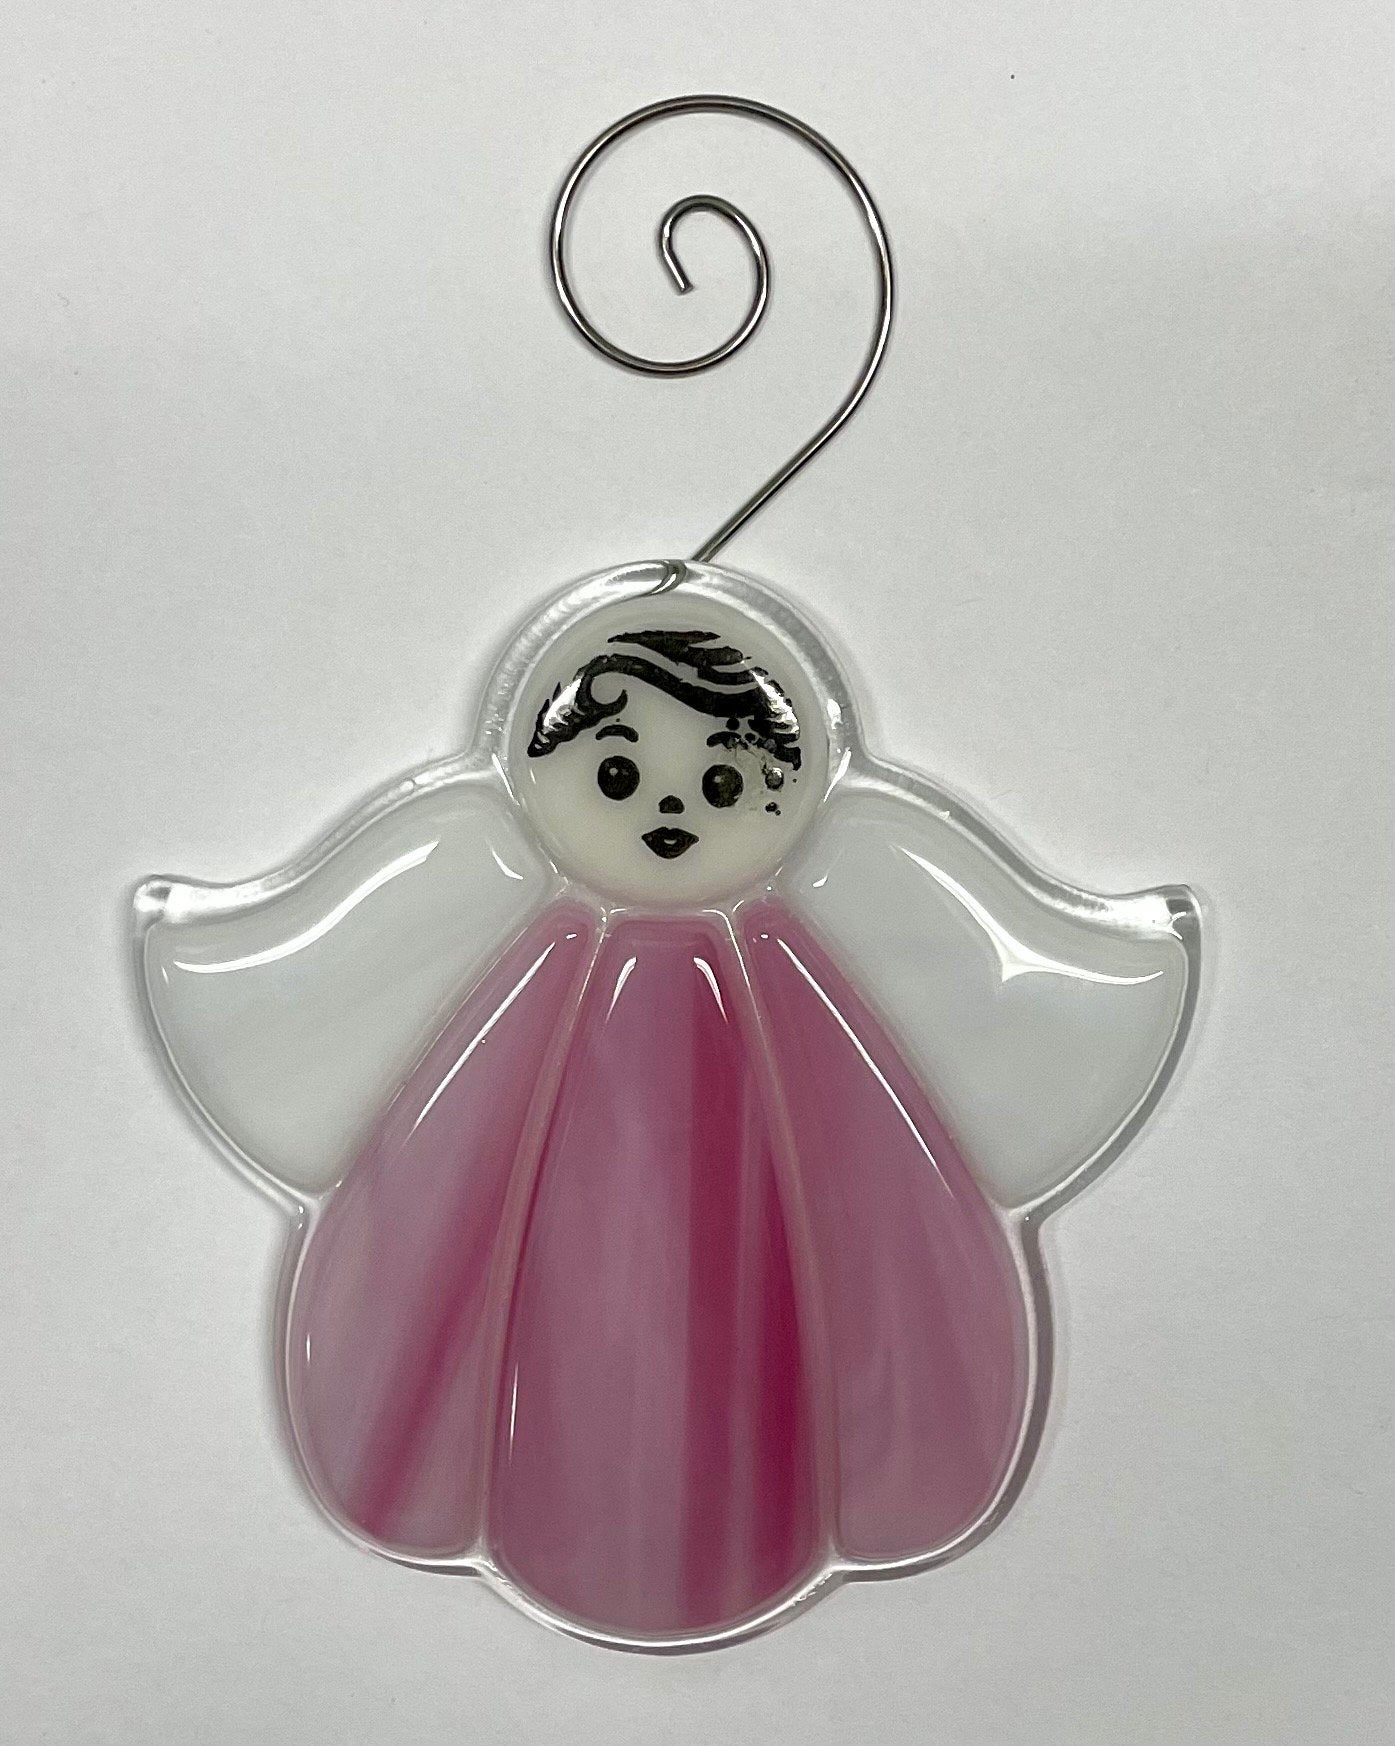 Angels with Face Detail Fused Glass Ornaments